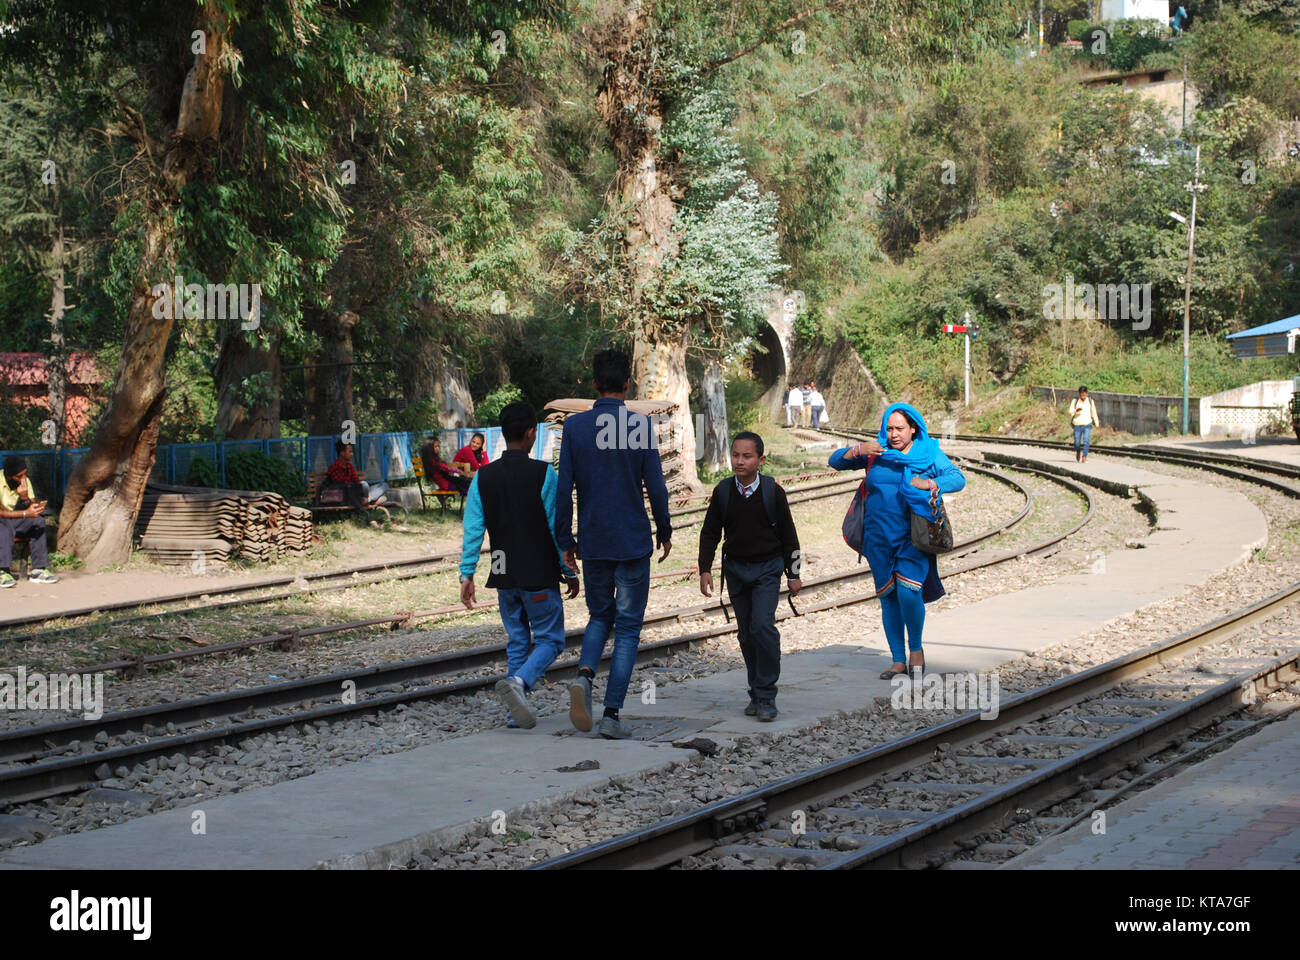 people walking on the train tracks at Solan railway station part of the Kalka - Shimla Railway line in North India Stock Photo